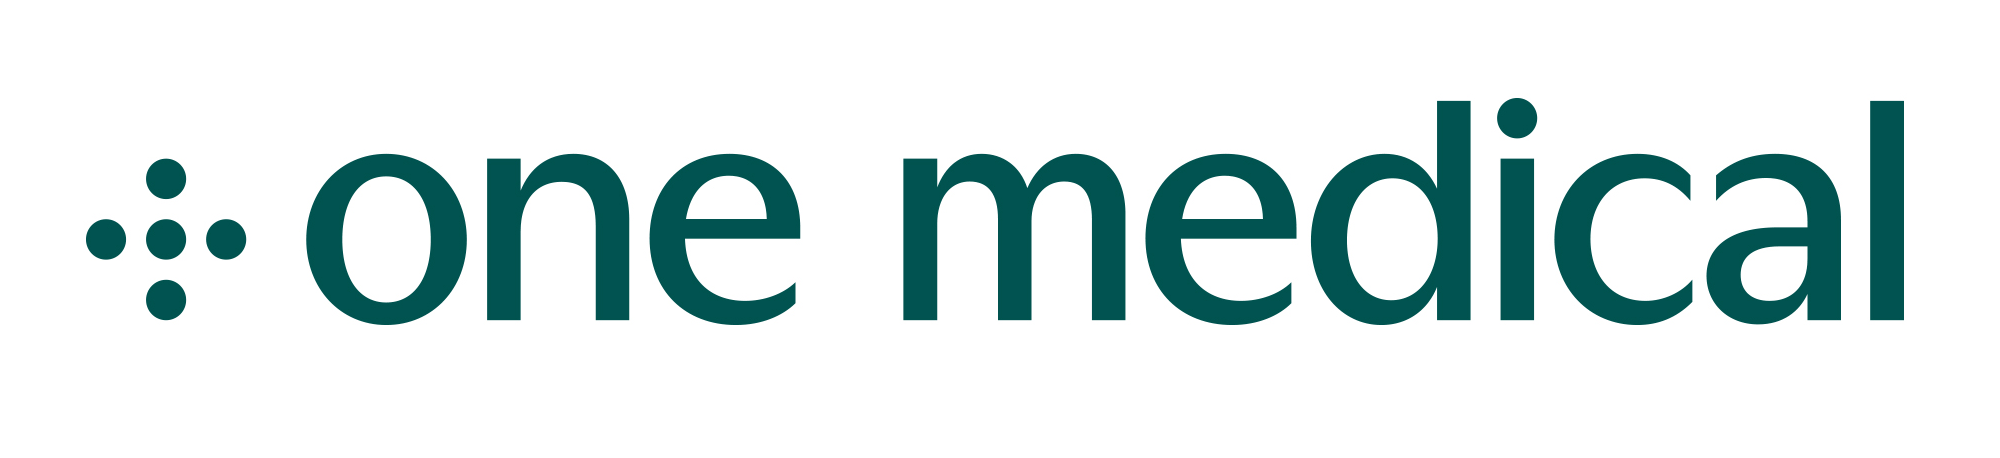 Supreme Medical Logo - Brand New: New Logo And Identity For One Medical By Moniker And In House